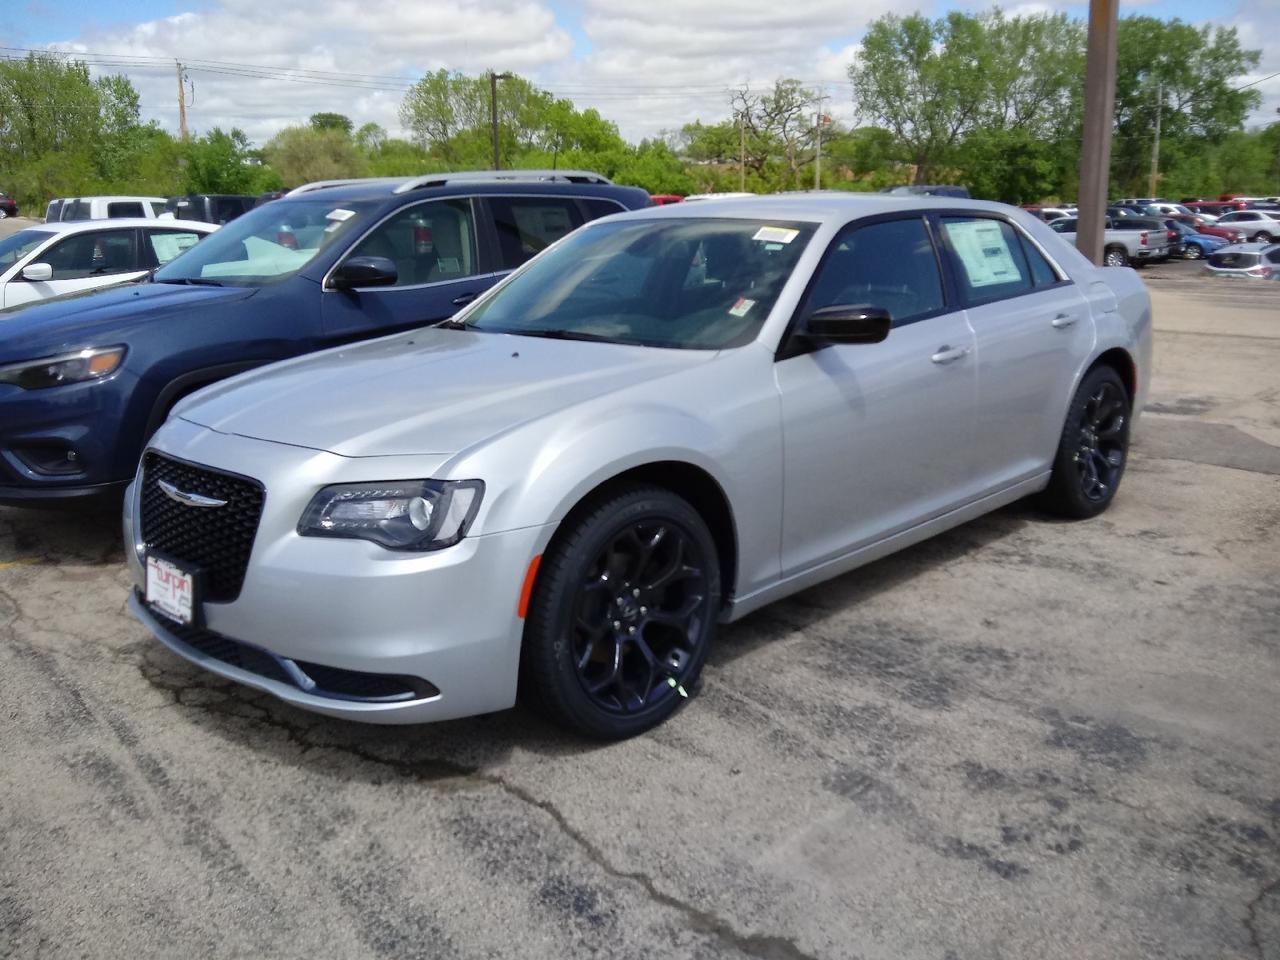 New 2019 Chrysler 300 Touring in Dubuque IA